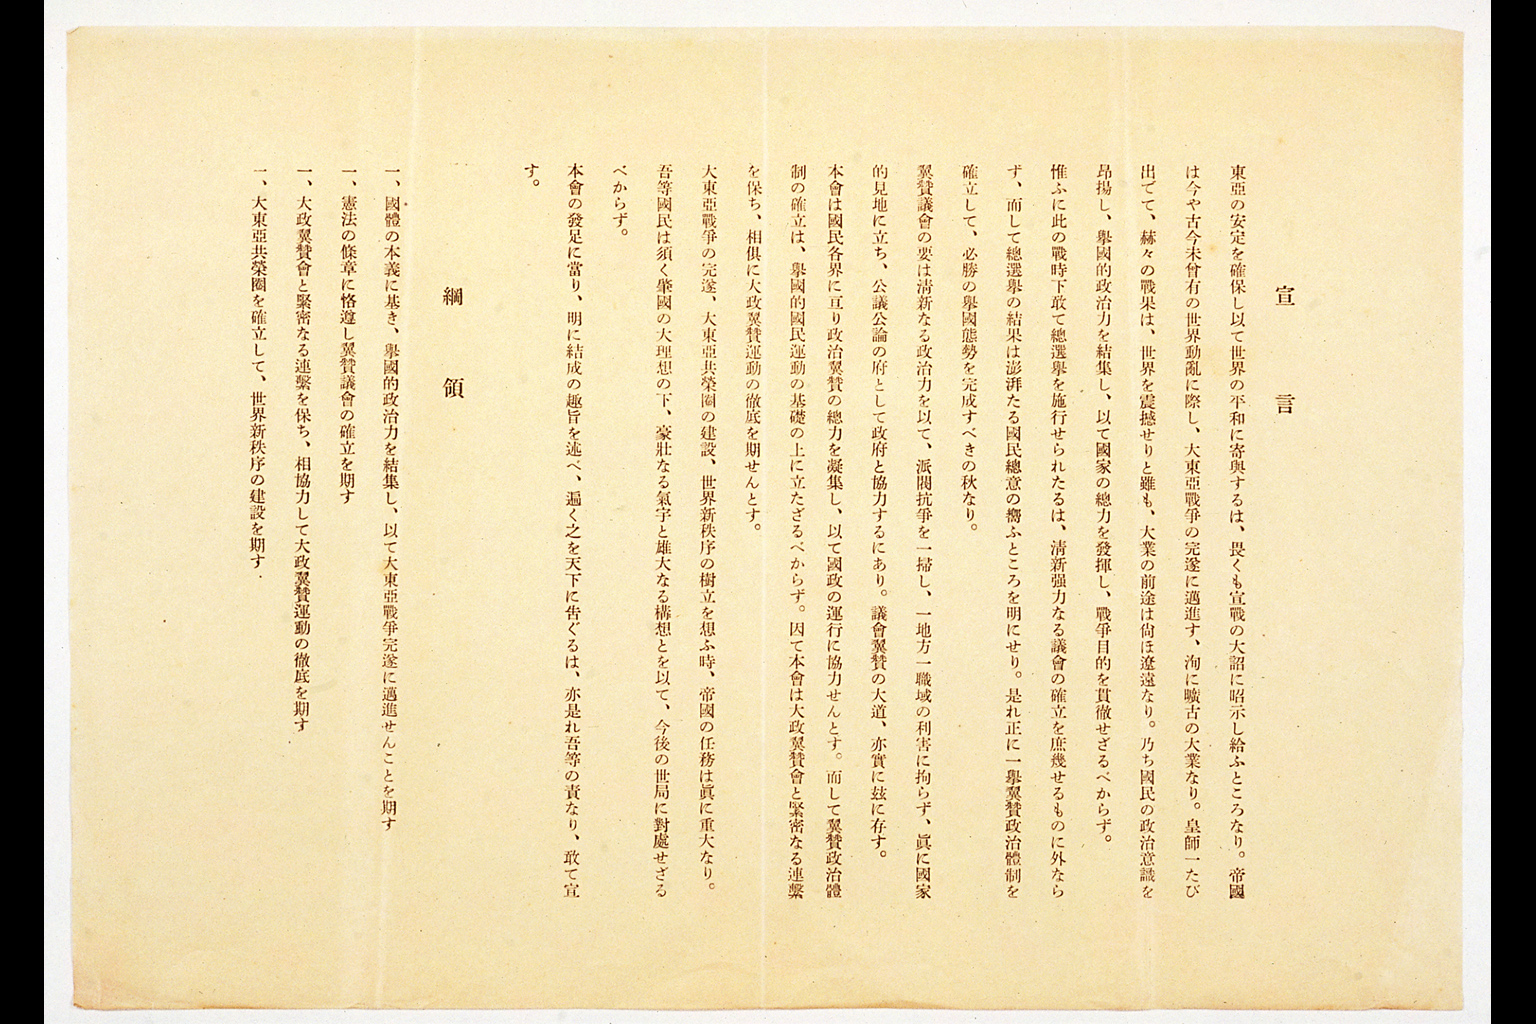 Proceedings of the General Convention Establishing the Imperial Rule Assistance Political Association: General Outline of Bylaws of Imperial Rule Assistance Political Association Proclamation; the Platform(larger)